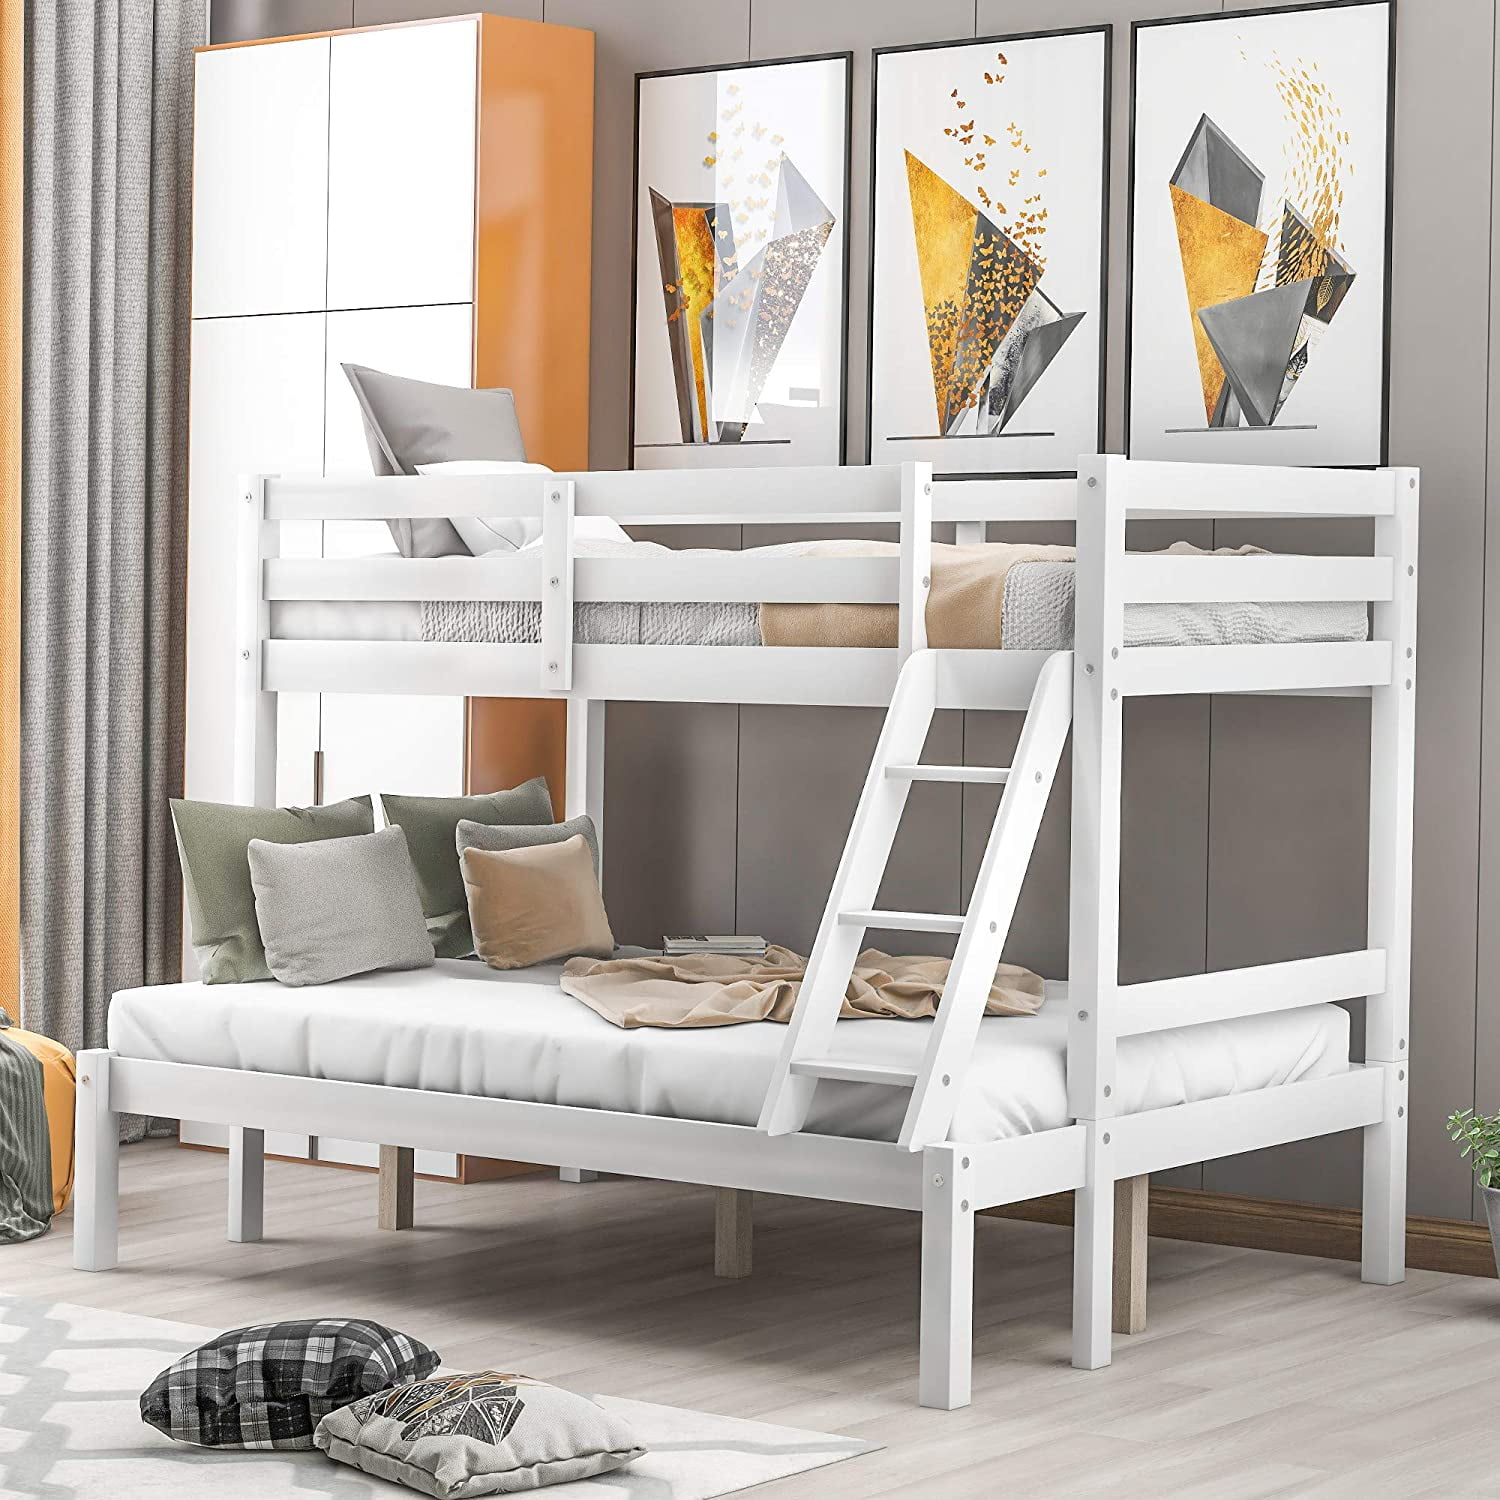 Churanty Twin Over Full Bunk Bed Solid, Twin Full Bunk Bed Solid Wood